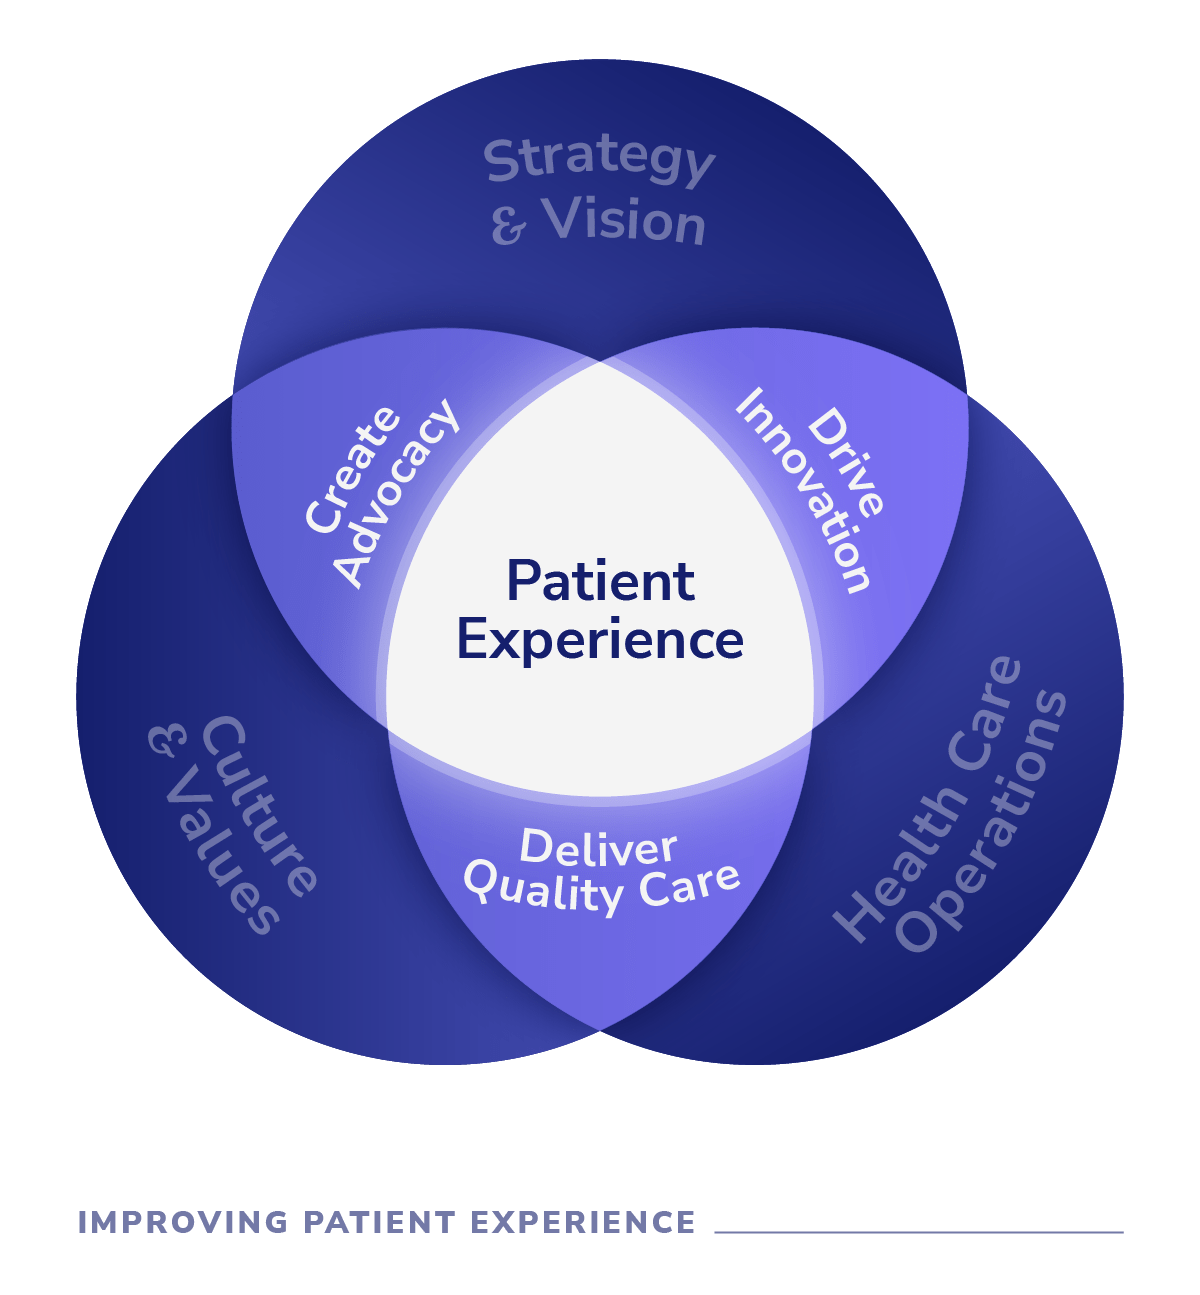 Patient-Centric Brand Model – Improving Patient Experience